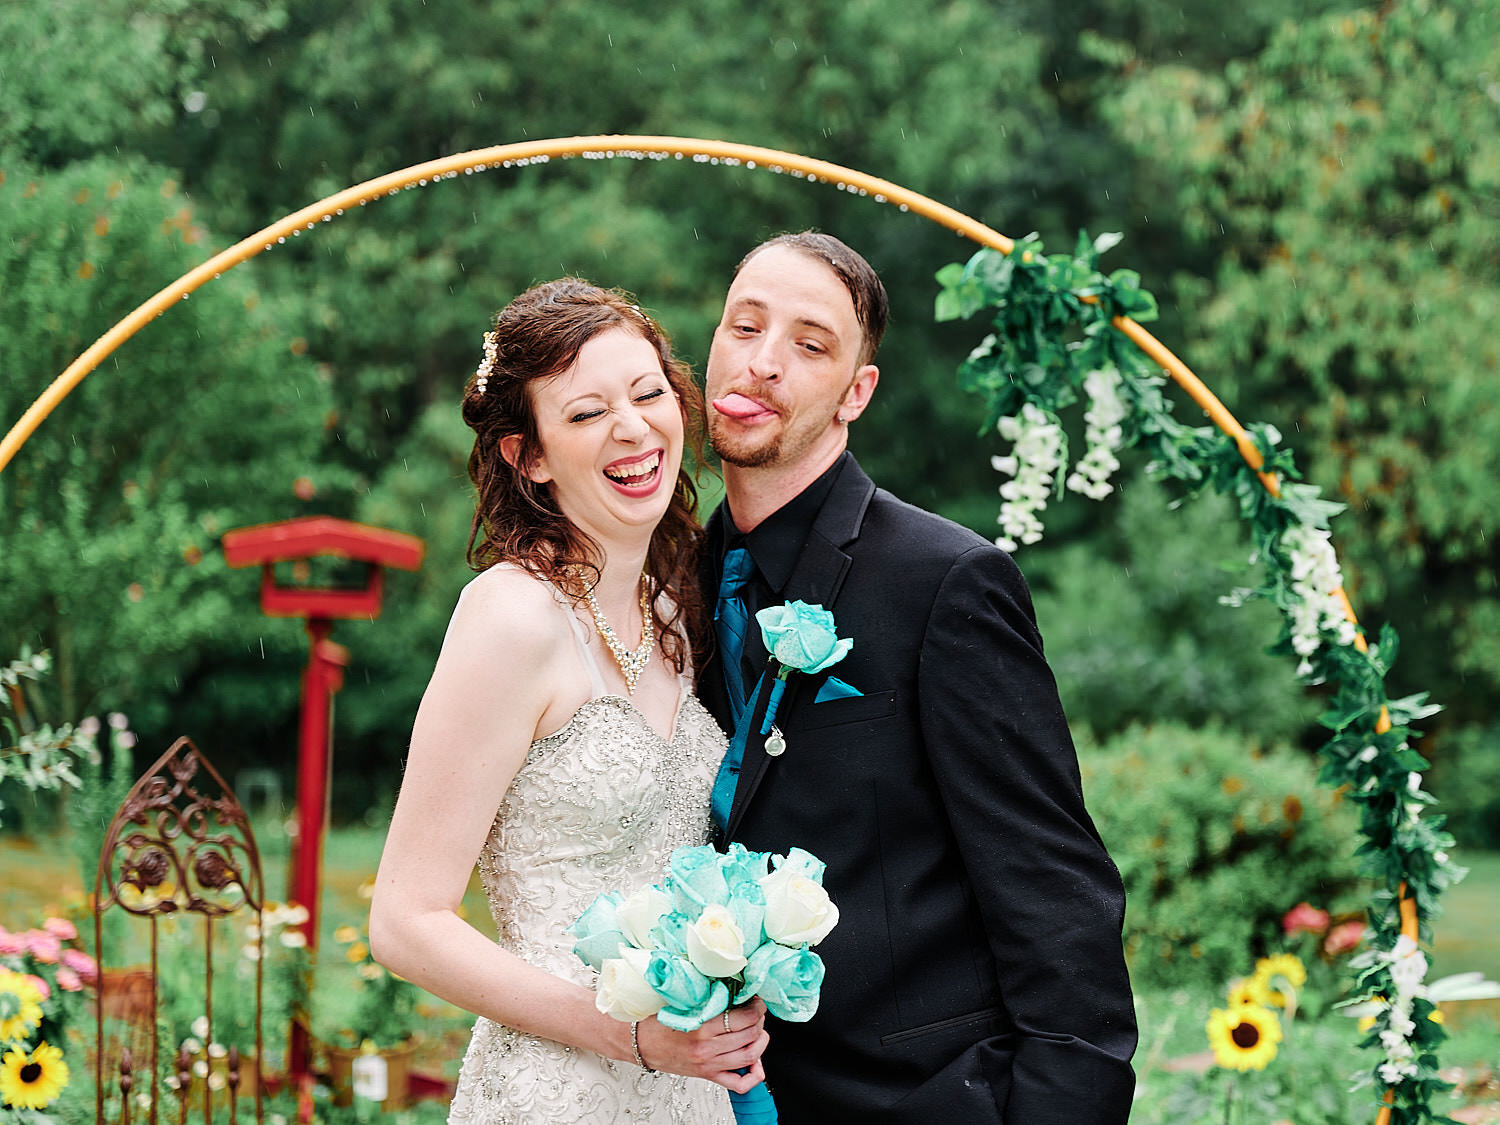  Alyssa Busching and George Goettel are getting married in their grandparents’ backyard under the pouring rain in the minds of the COVID-19 pandemic with only closest friends and family at the ceremony 